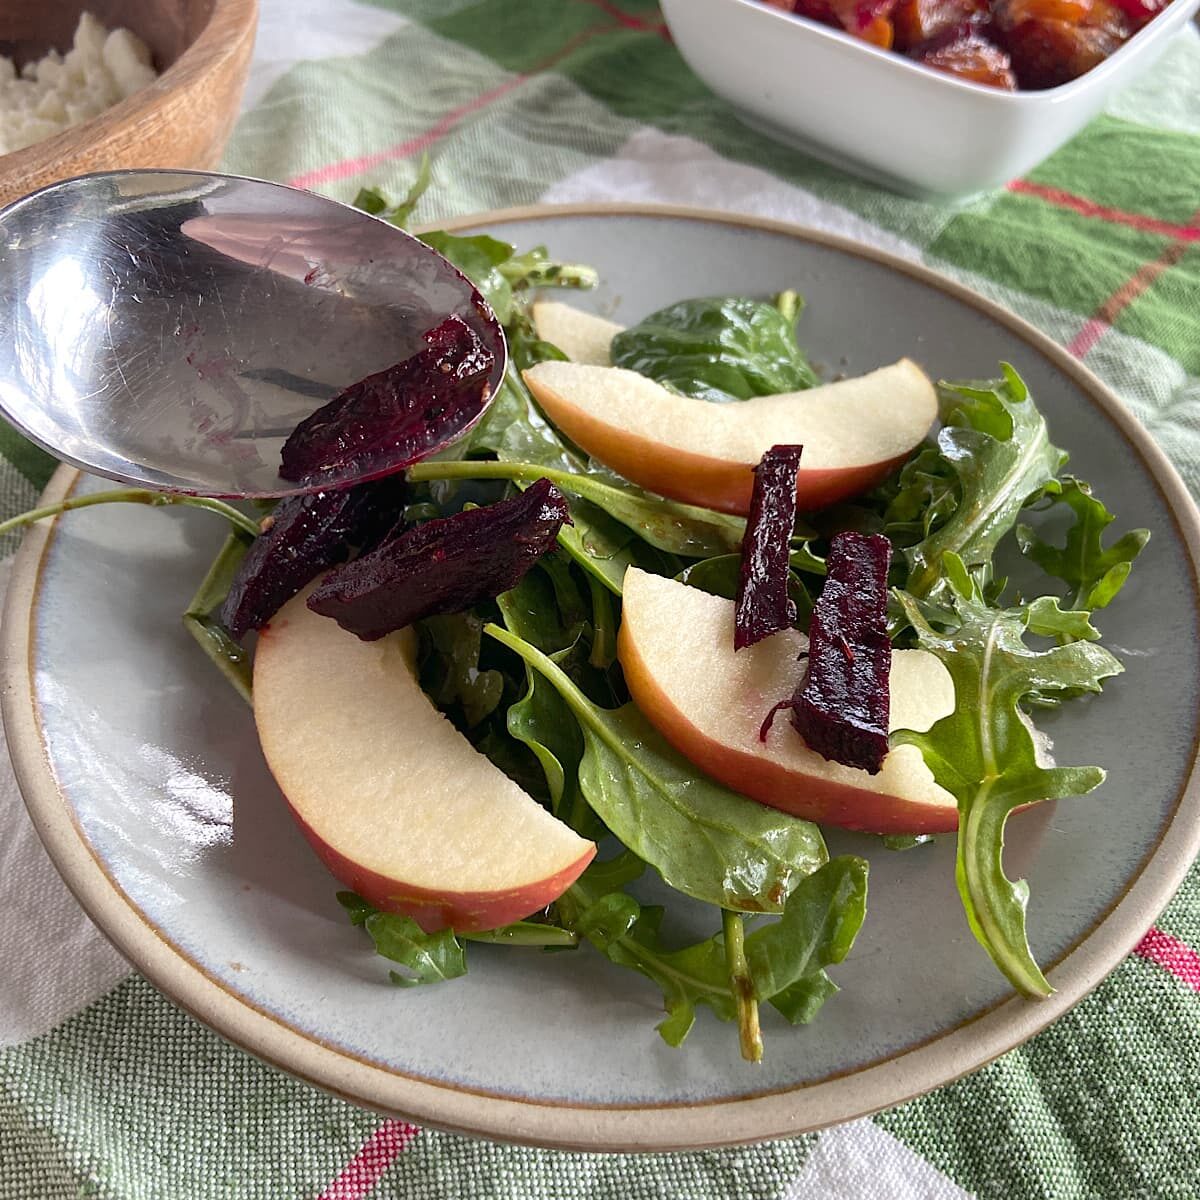 Layering beets over sliced apples, and greens on a plate